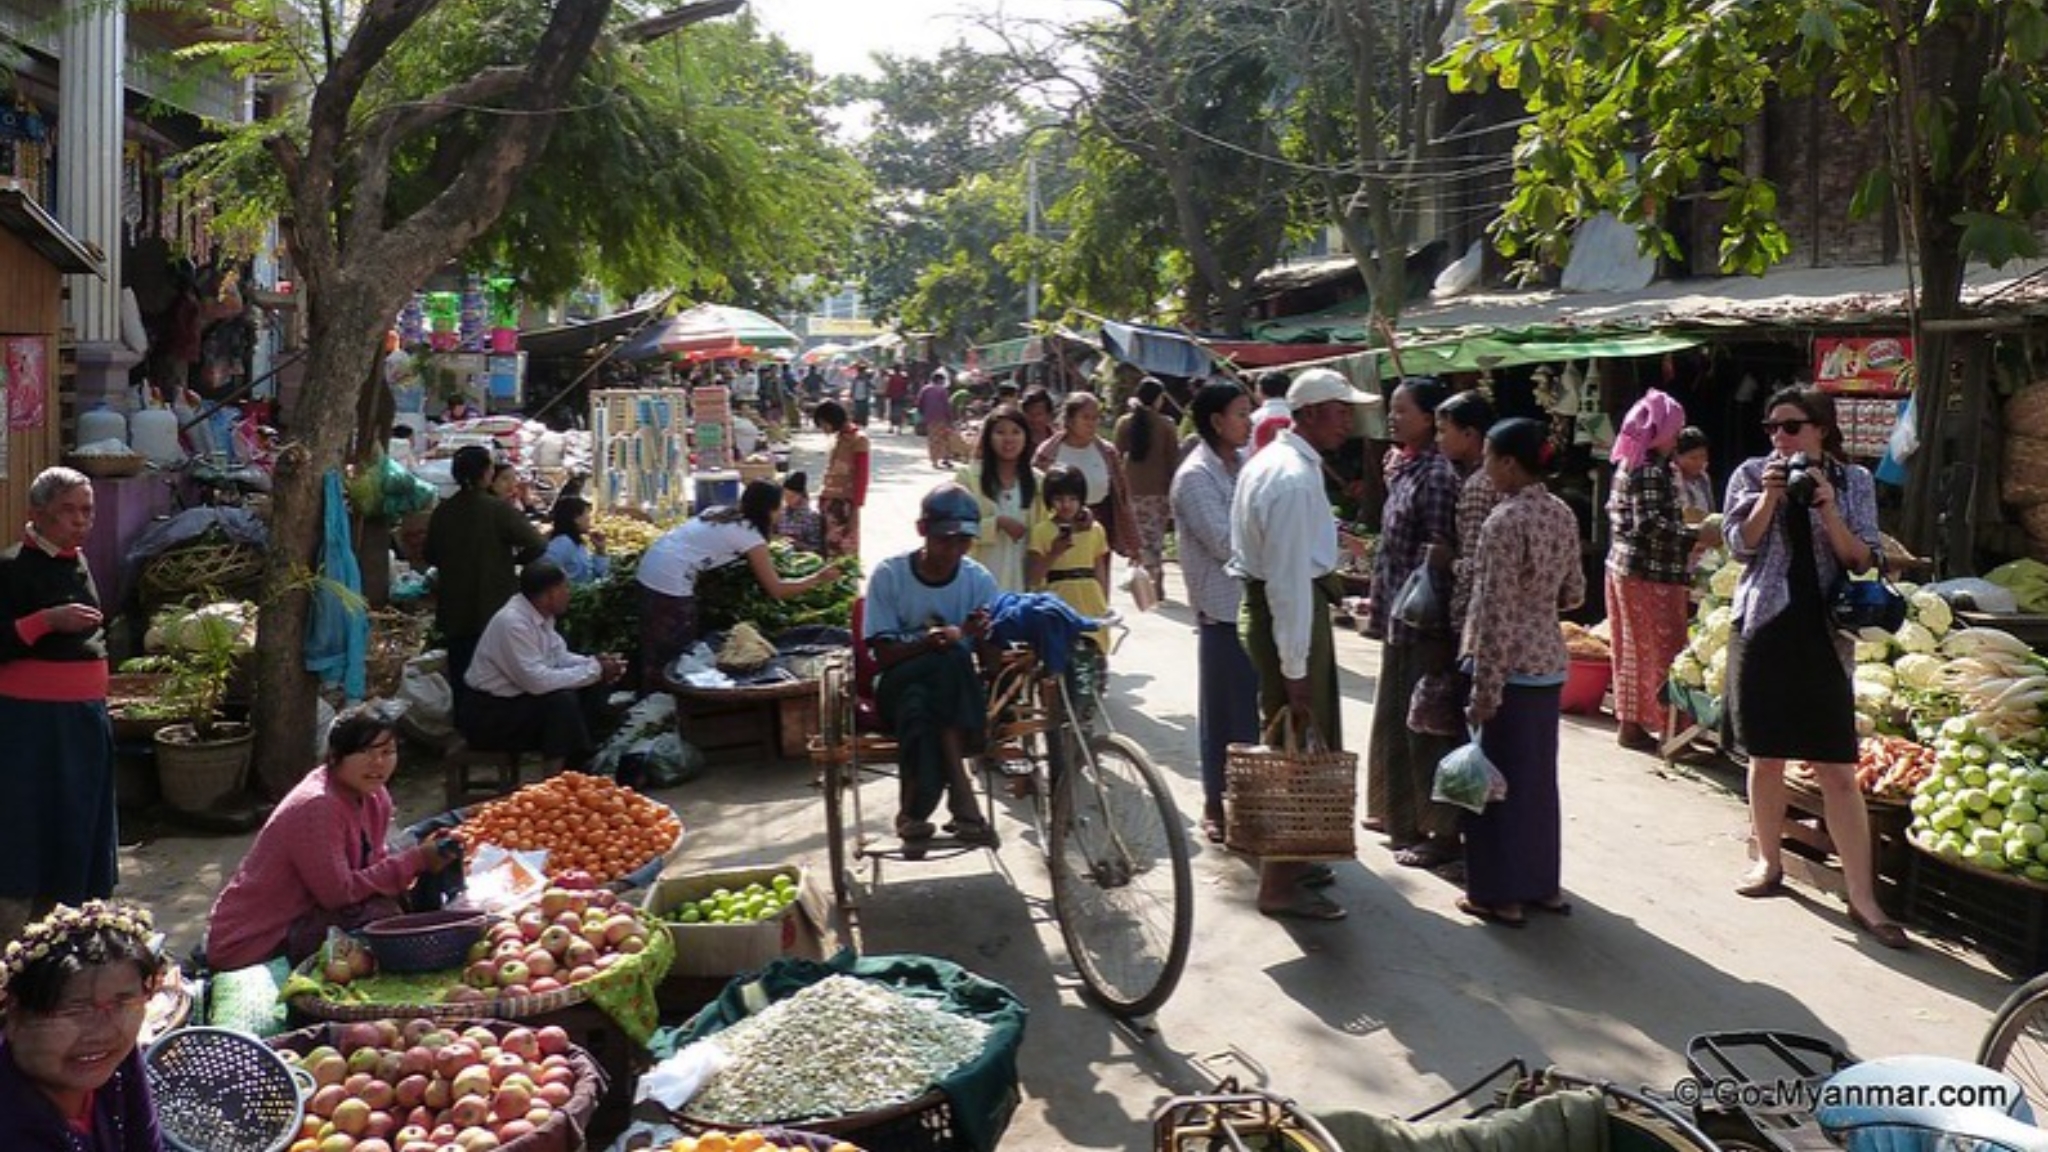 A Bustling And Hustling Morning In The Local Market